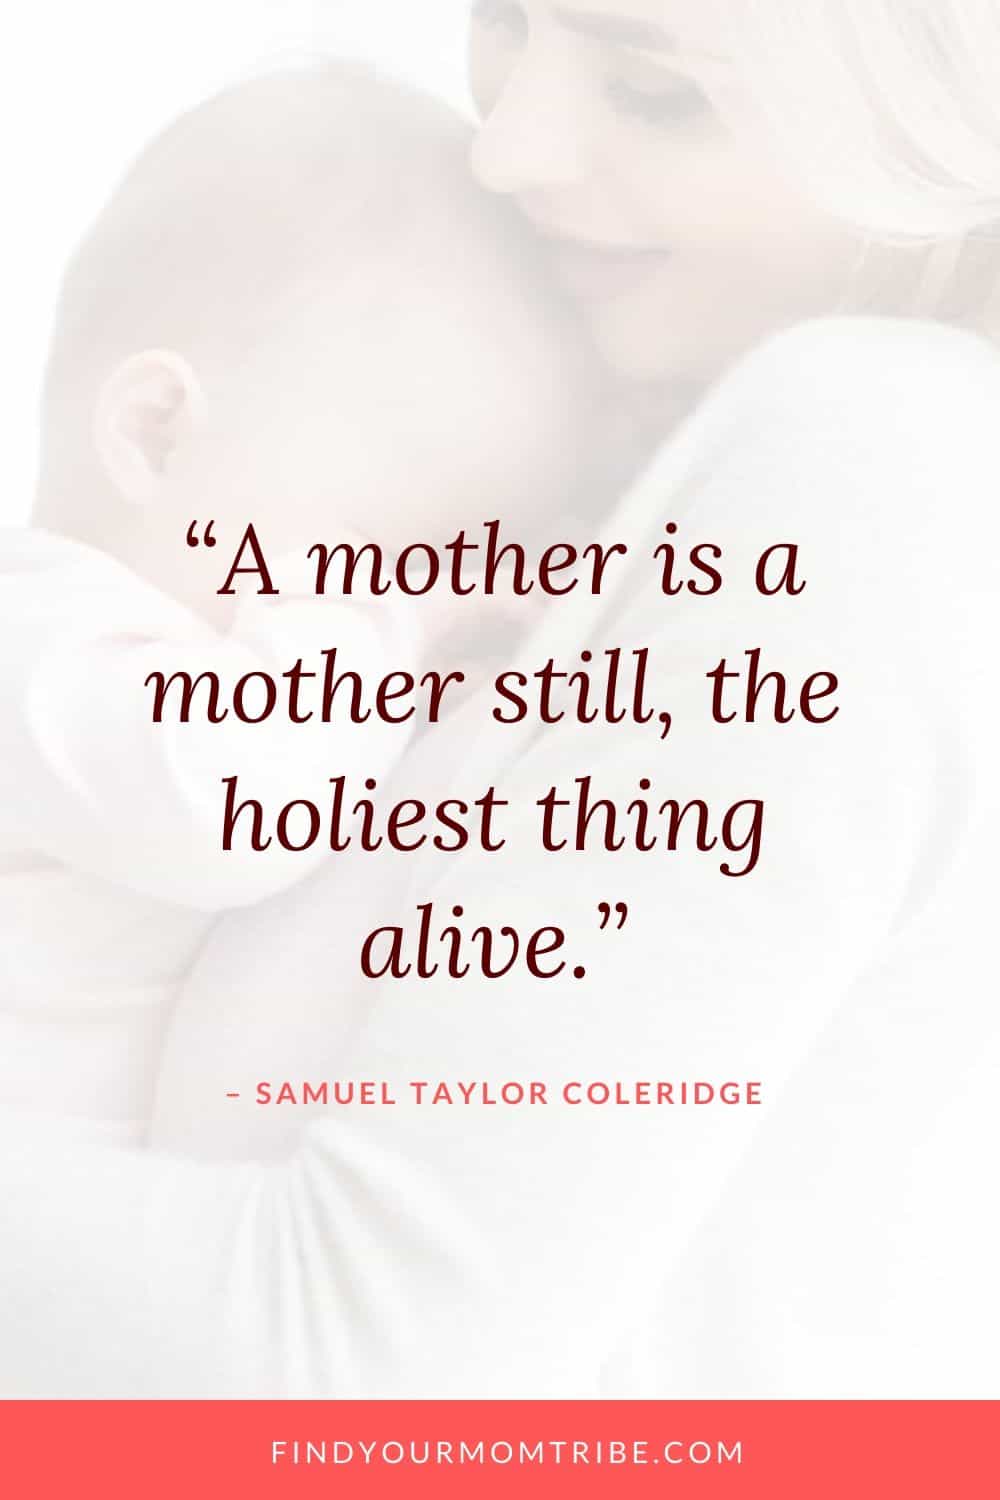 Best Strong Mom Quotes – Because Moms Are The Real Heroes!